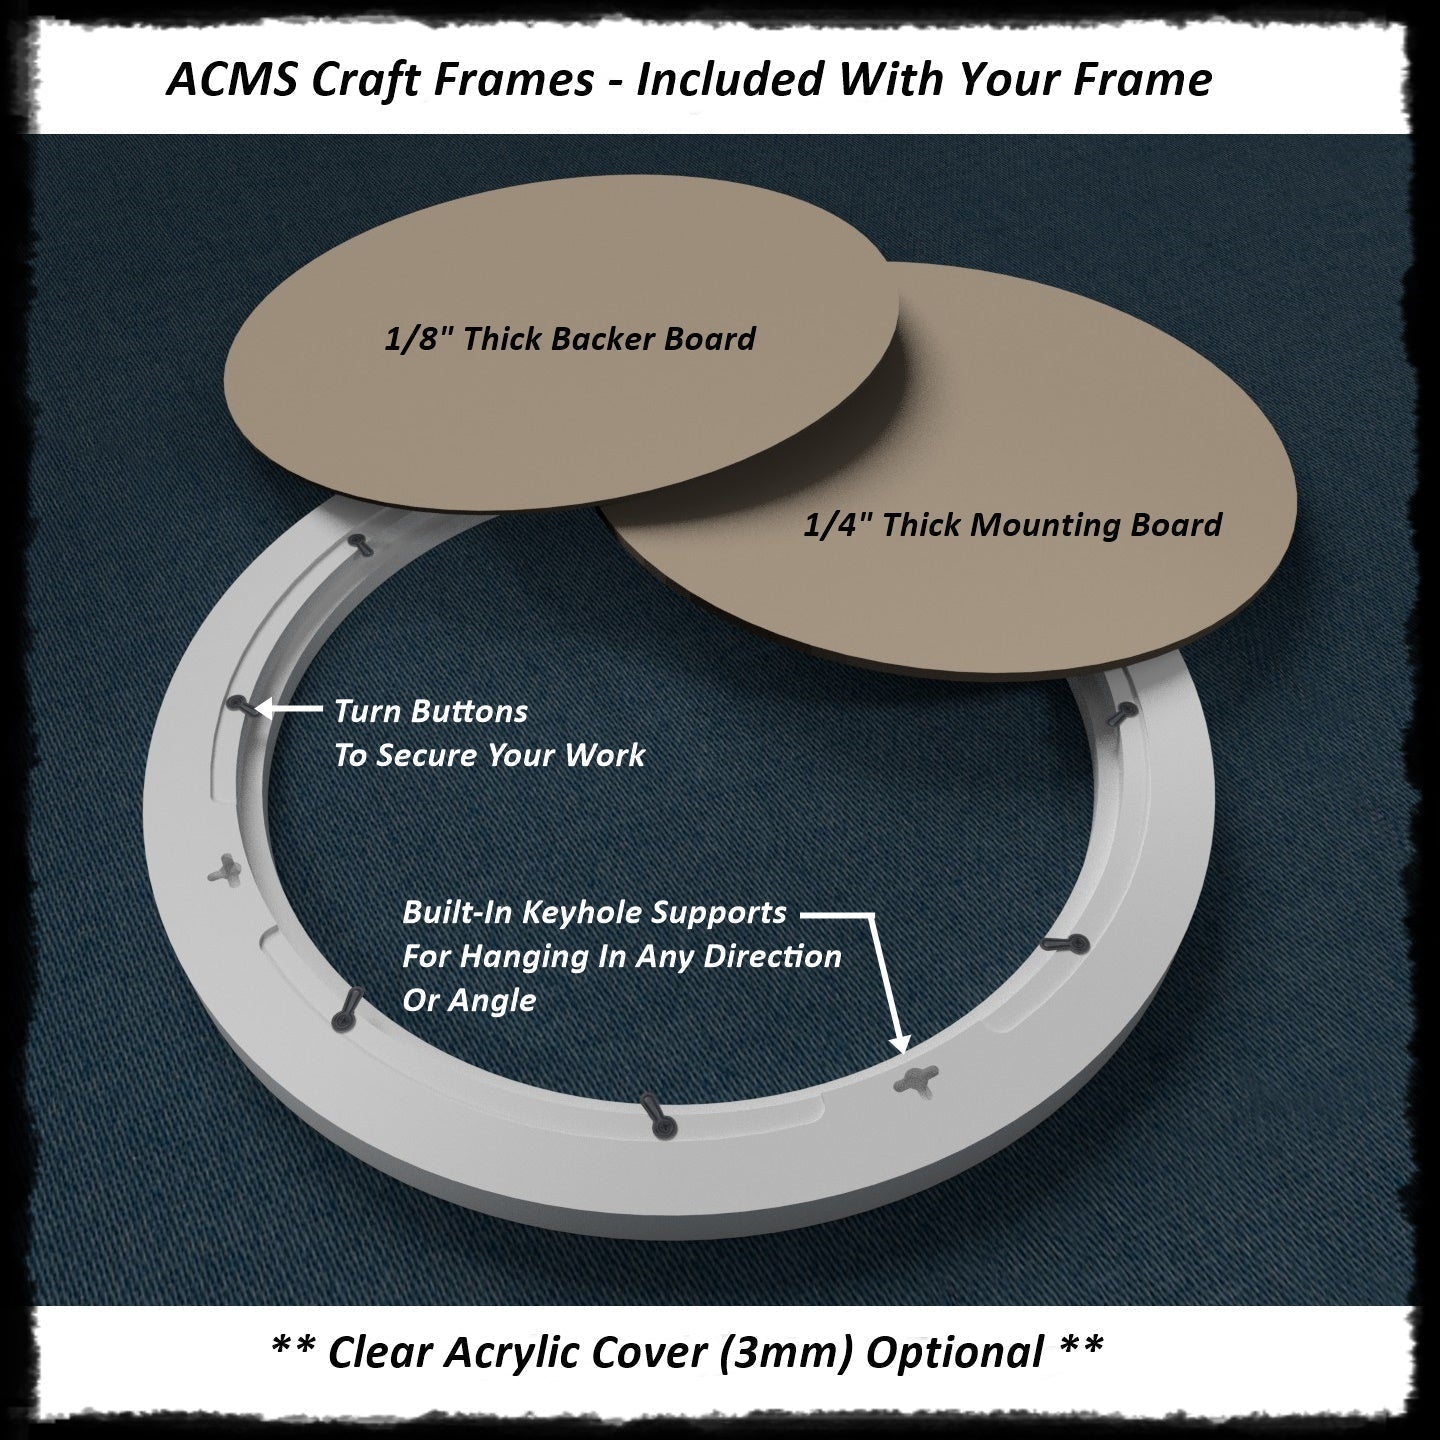 Oval Craft Frame - HUMP Profile - 1 1/4" Frame Width - 1" Thick